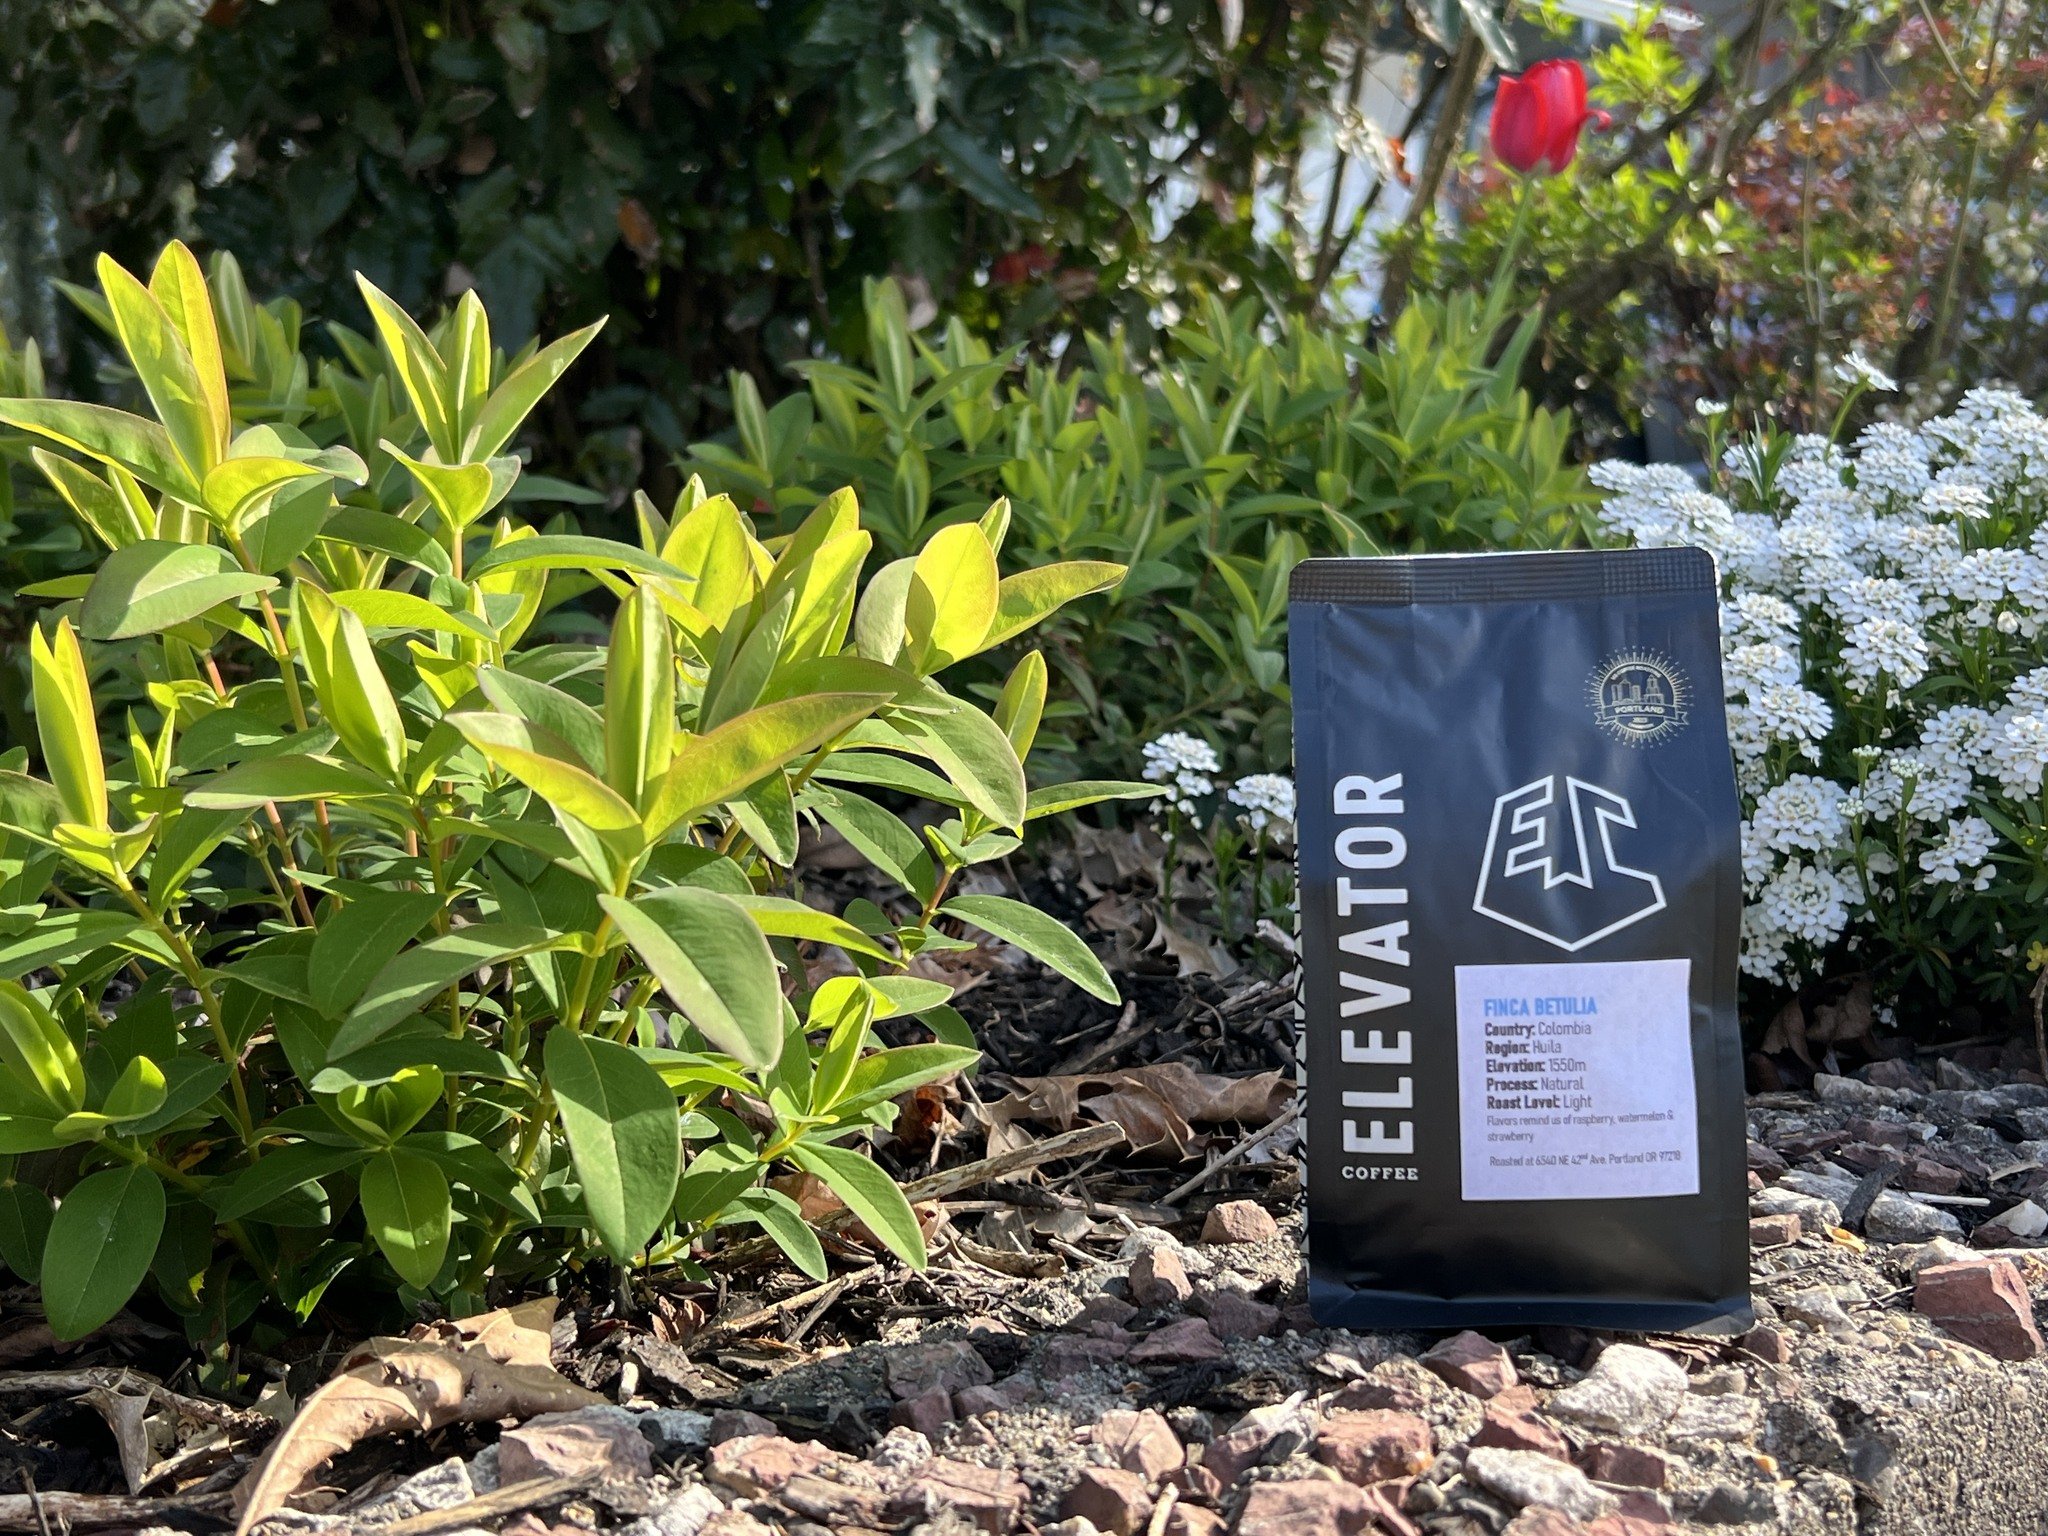 ATTN ELEVATOR FANS!

Our friends at @legacycoffeepdx are dealing with losing a lease, and the world needs more places like this, not less.  We have collaborated with them to offer this very special stunner of a coffee, as a Legacy Coffee Exclusive.  